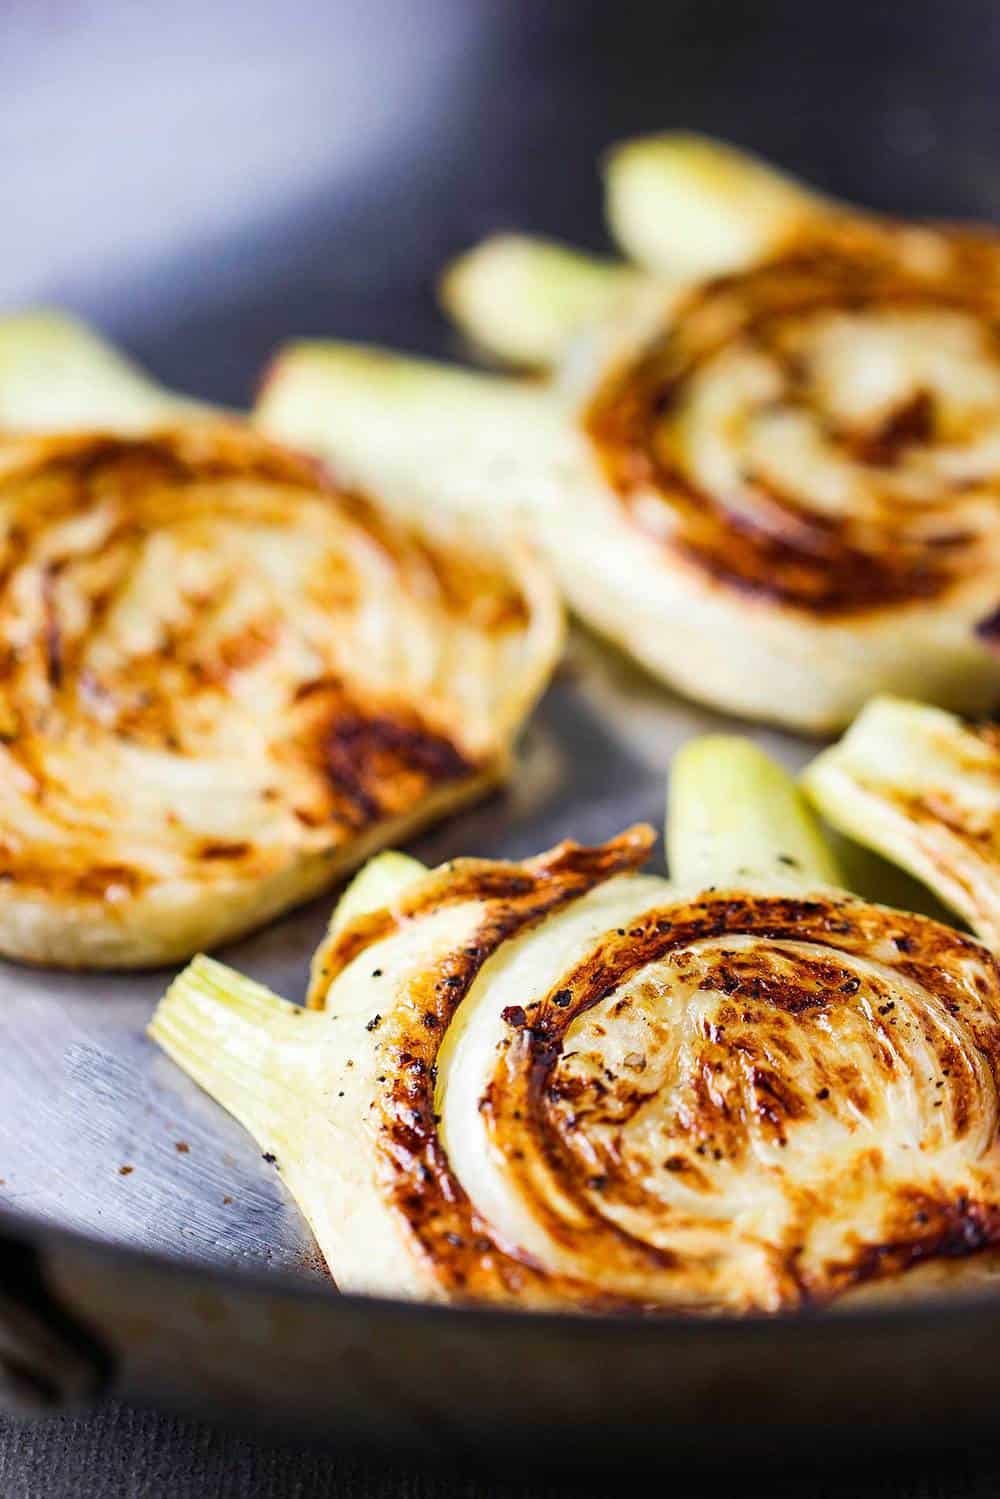 Slices of roasted fennel in a large skillet.